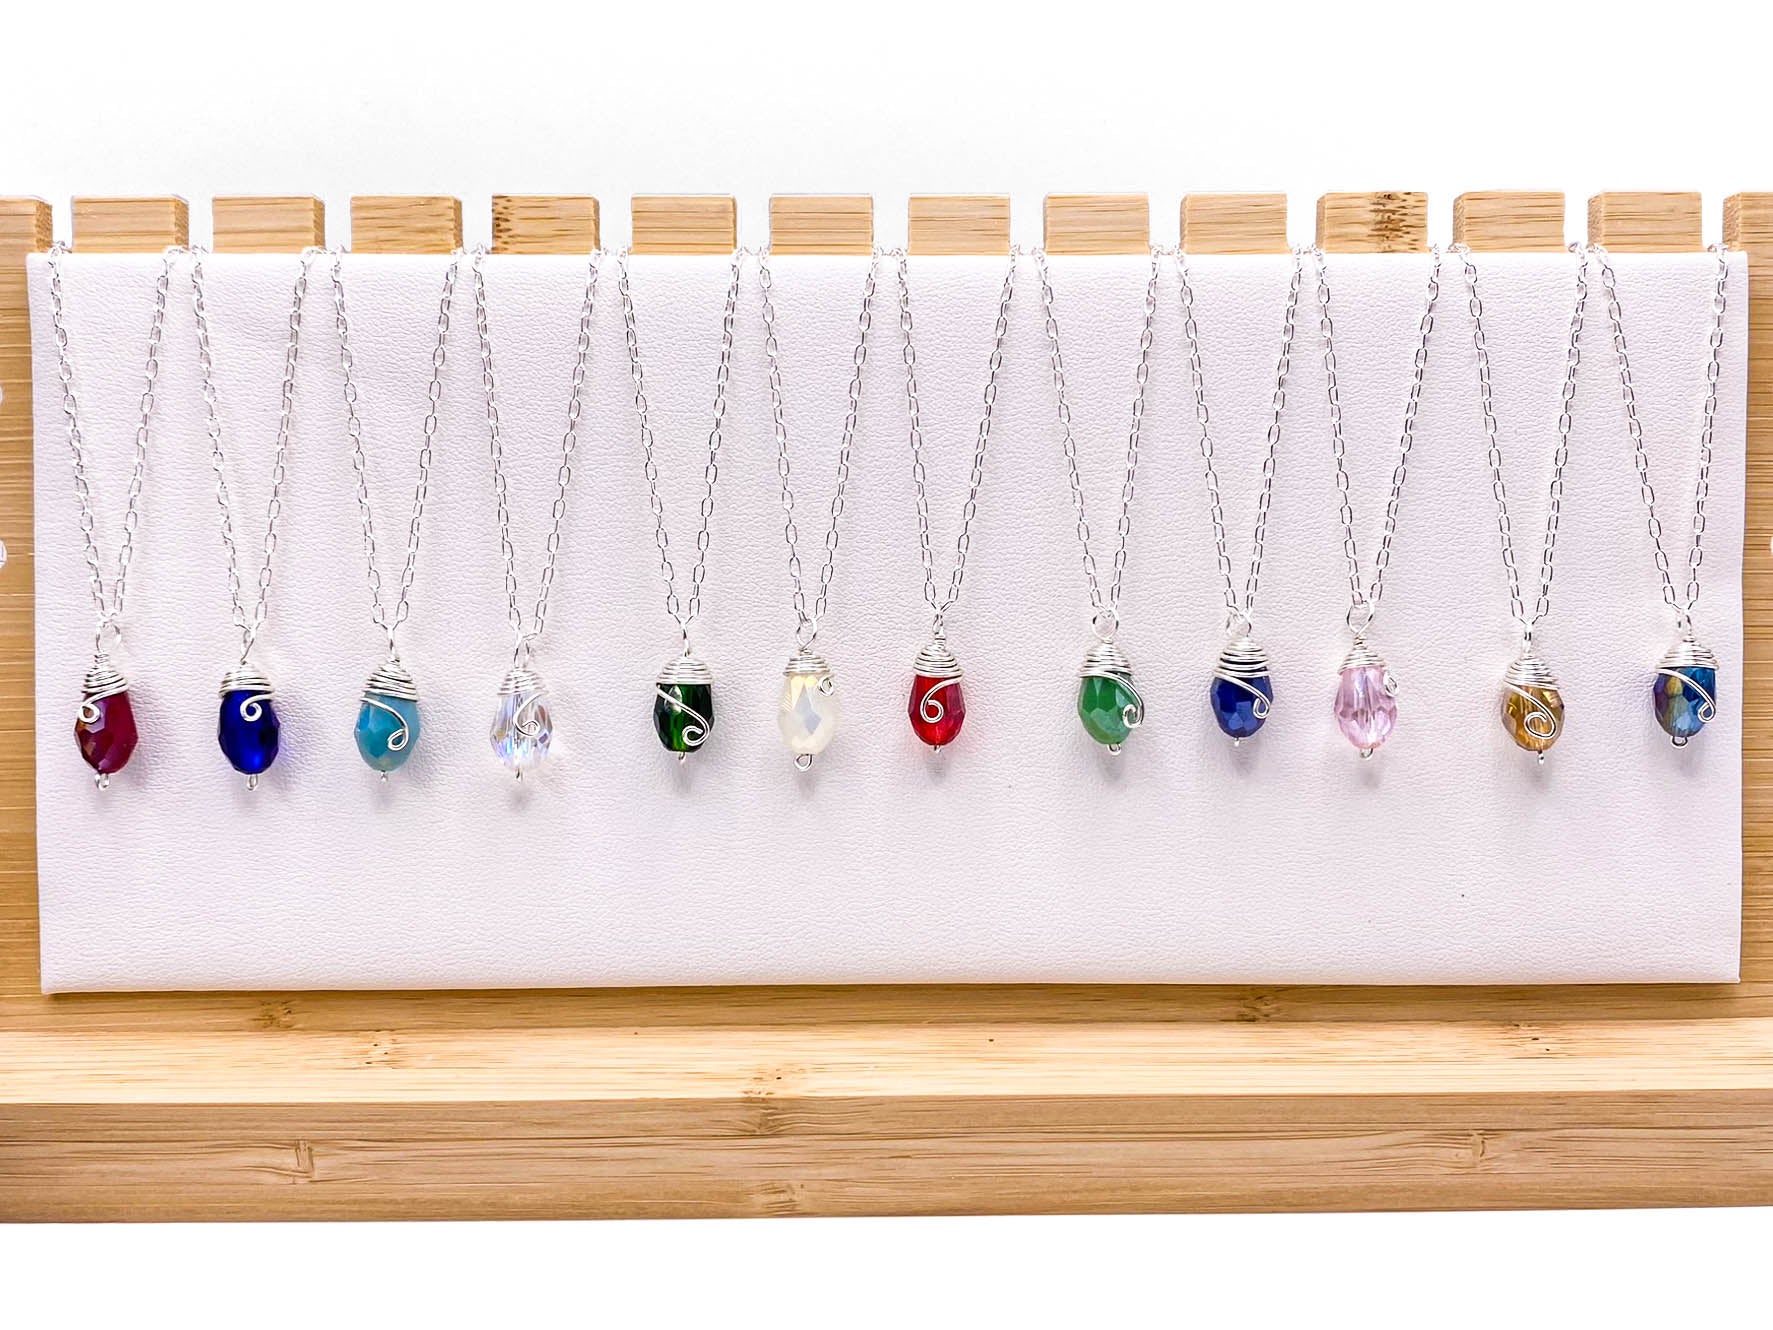 Initial Necklace with Birthstone | Sterling Silver – The Silver Wing